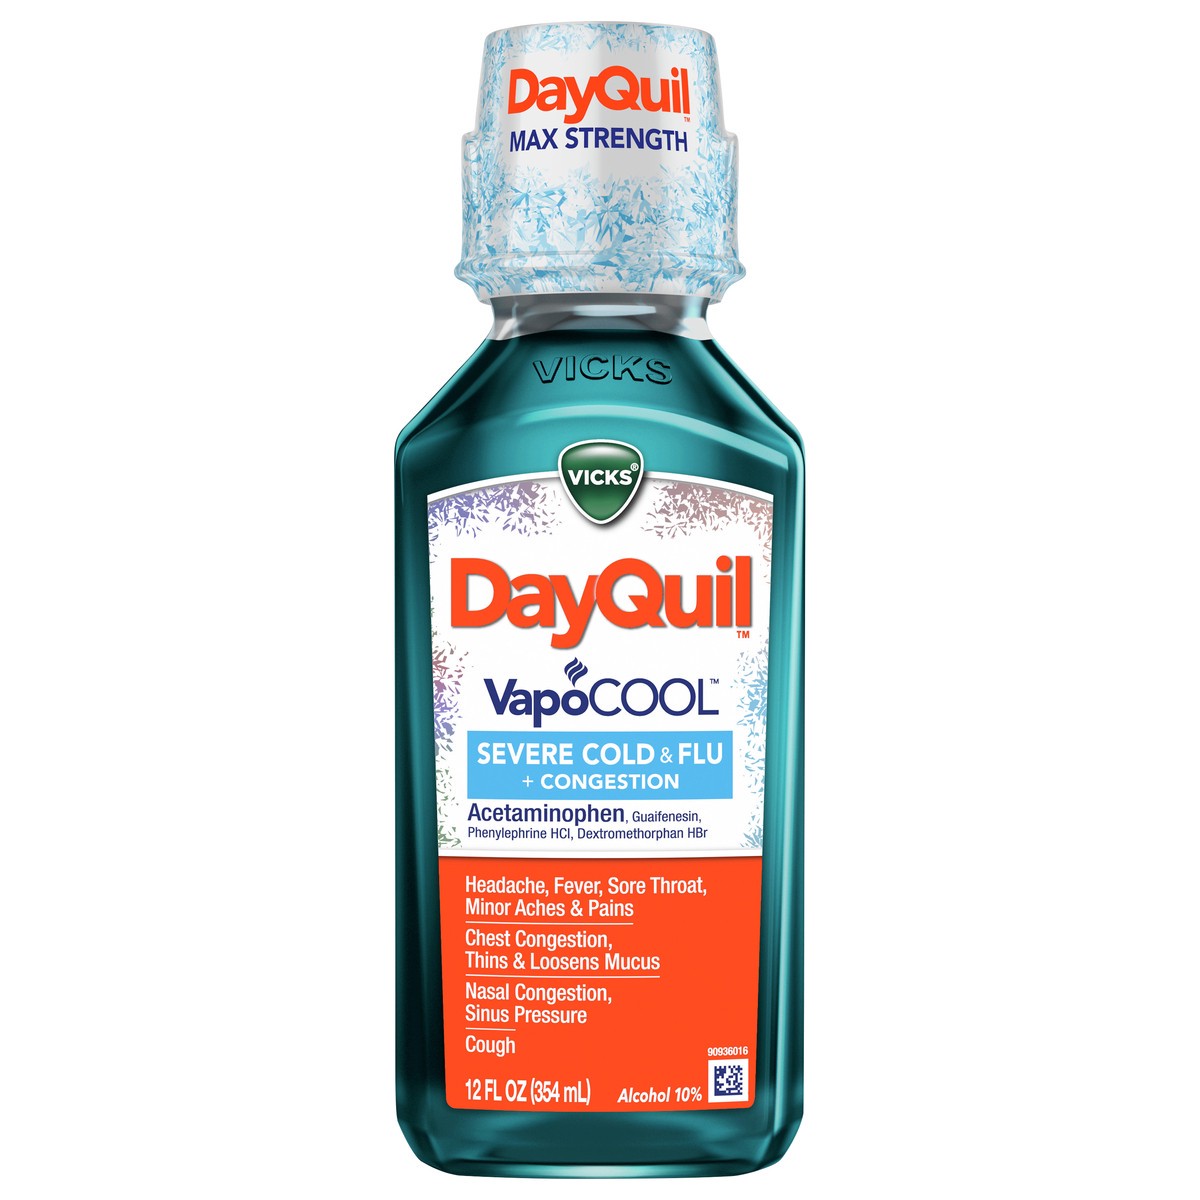 slide 1 of 2, Vicks DayQuil VapoCOOL SEVERE Cold & Flu Liquid Over-the-Counter Medicine, Powerful, Non-Drowsy Daytime Relief for Headache, Fever, Sore Throat, Minor Aches and Pains, Chest Congestion, Stuffy Nose, Nasal Congestion, Sinus Pressure, and Cough, 12 FL OZ, 12 fl oz